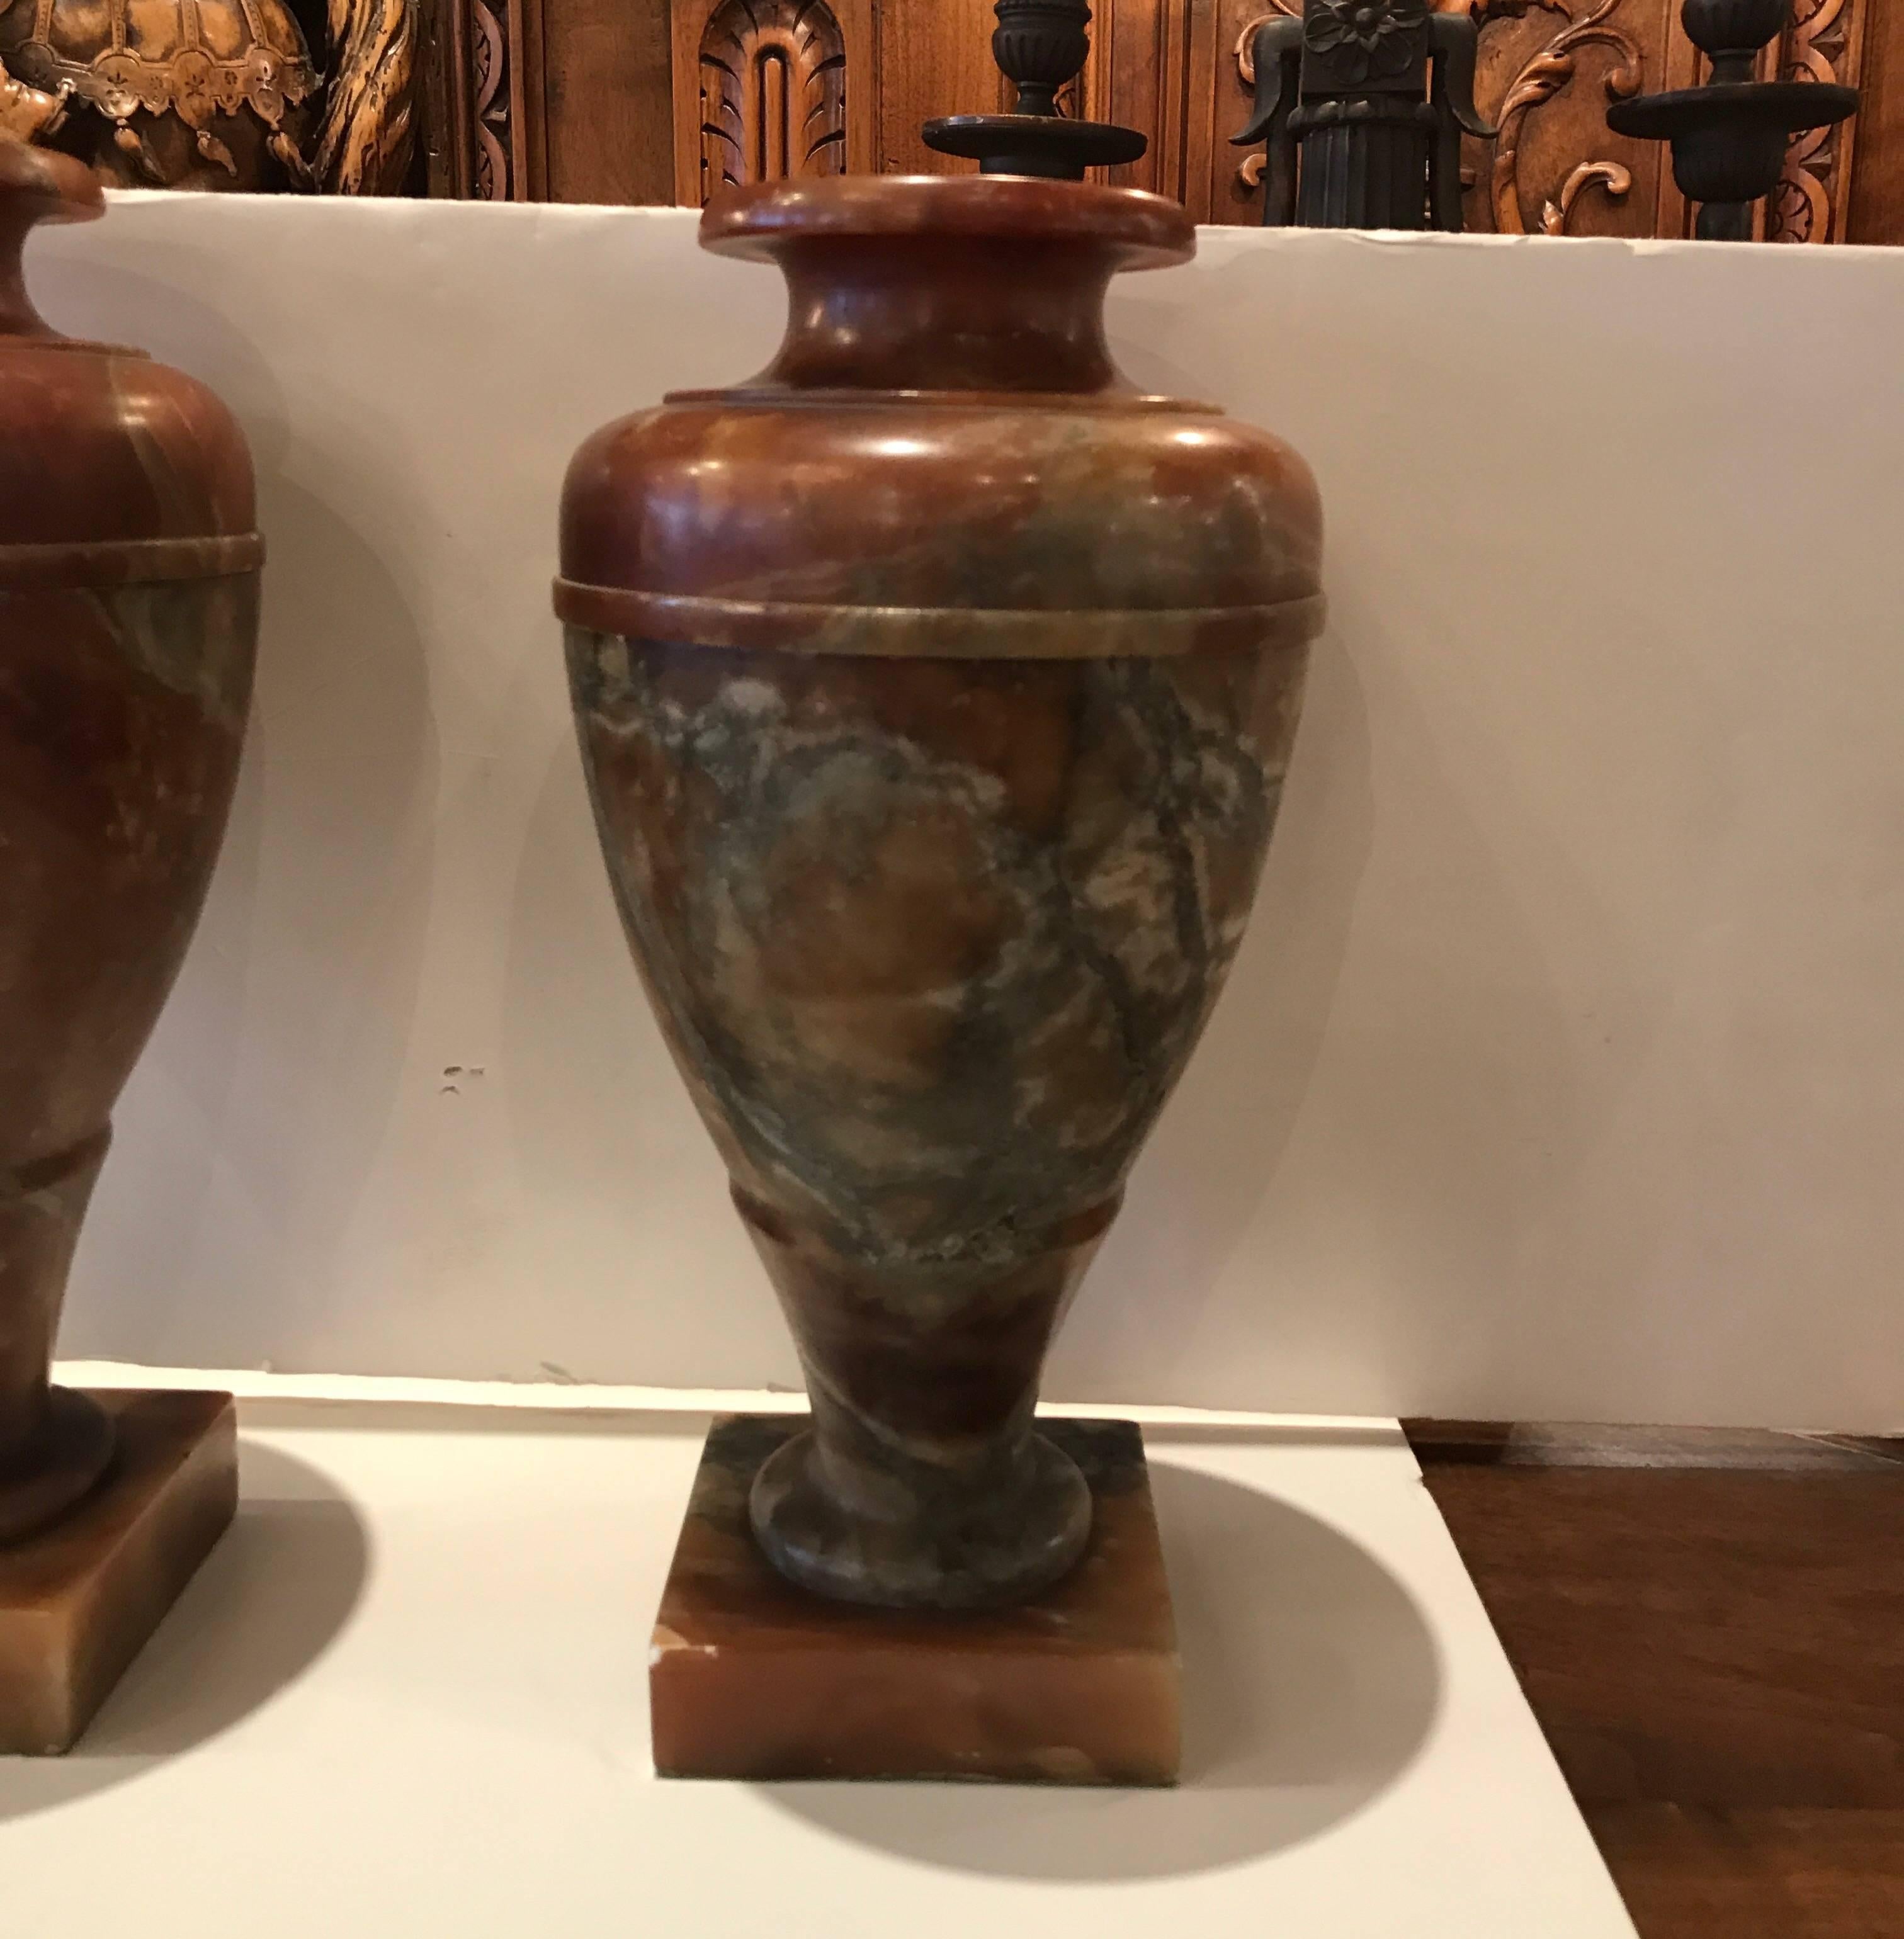 A pair of natural rouge marble urn luminary lamps. The marble in a deep amber color with natural veining in shades of grey. The lids lift to allow access to the bulbs. Each take a standard chandelier bulb, Italy, 1920s.